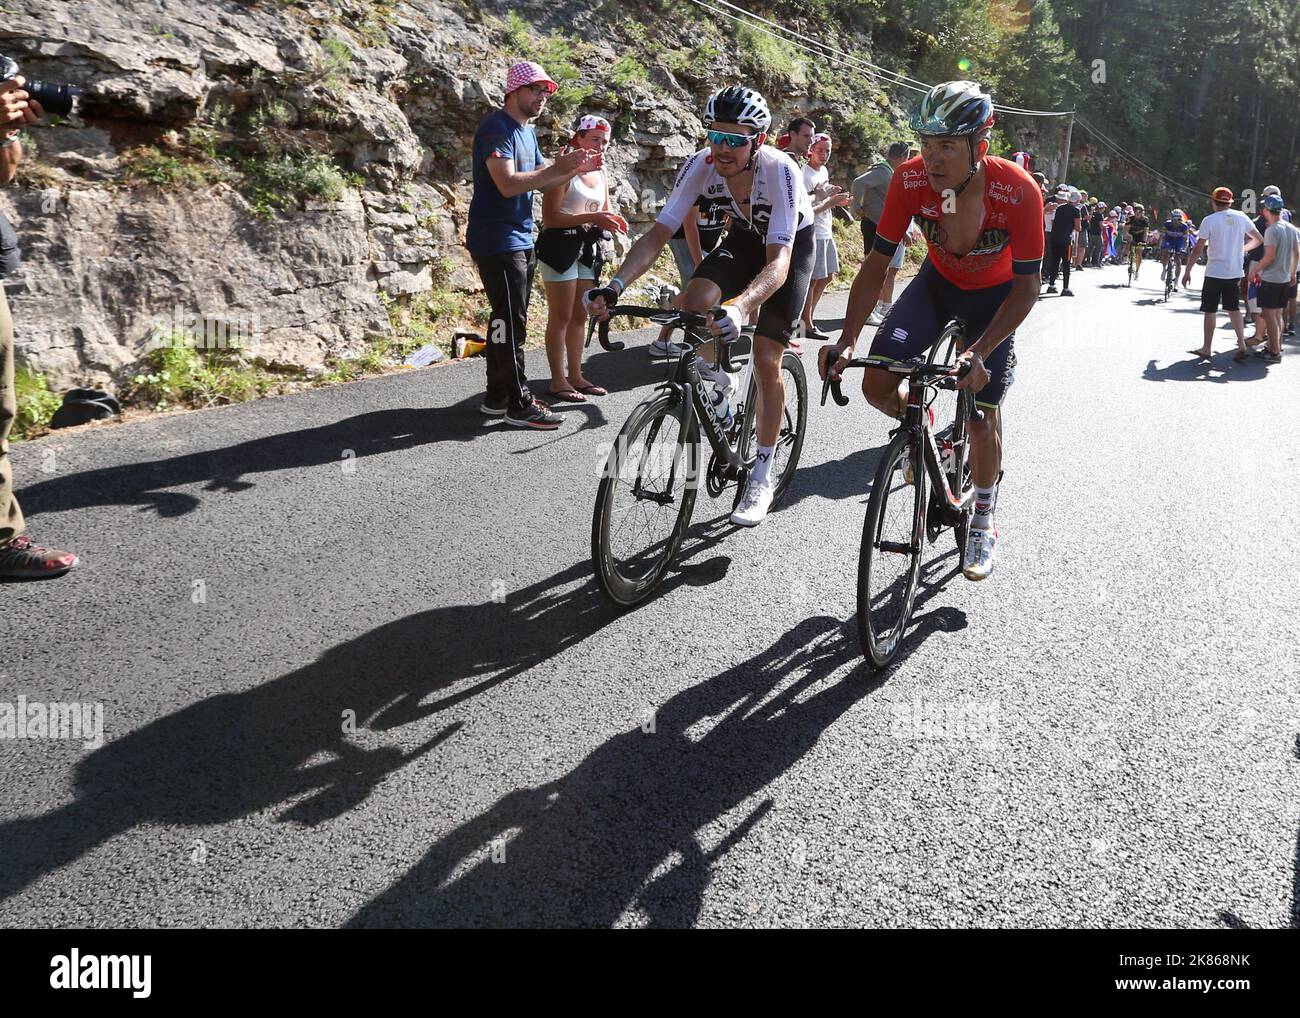 Luke Rowe of Team Sky Procycling and Heinrich Haussier of team Bahrain-Merida during Stage 14 of the Tour de France from Saint-Paul-Trois-Chateaux to Mende on July 21, 2018. Stock Photo